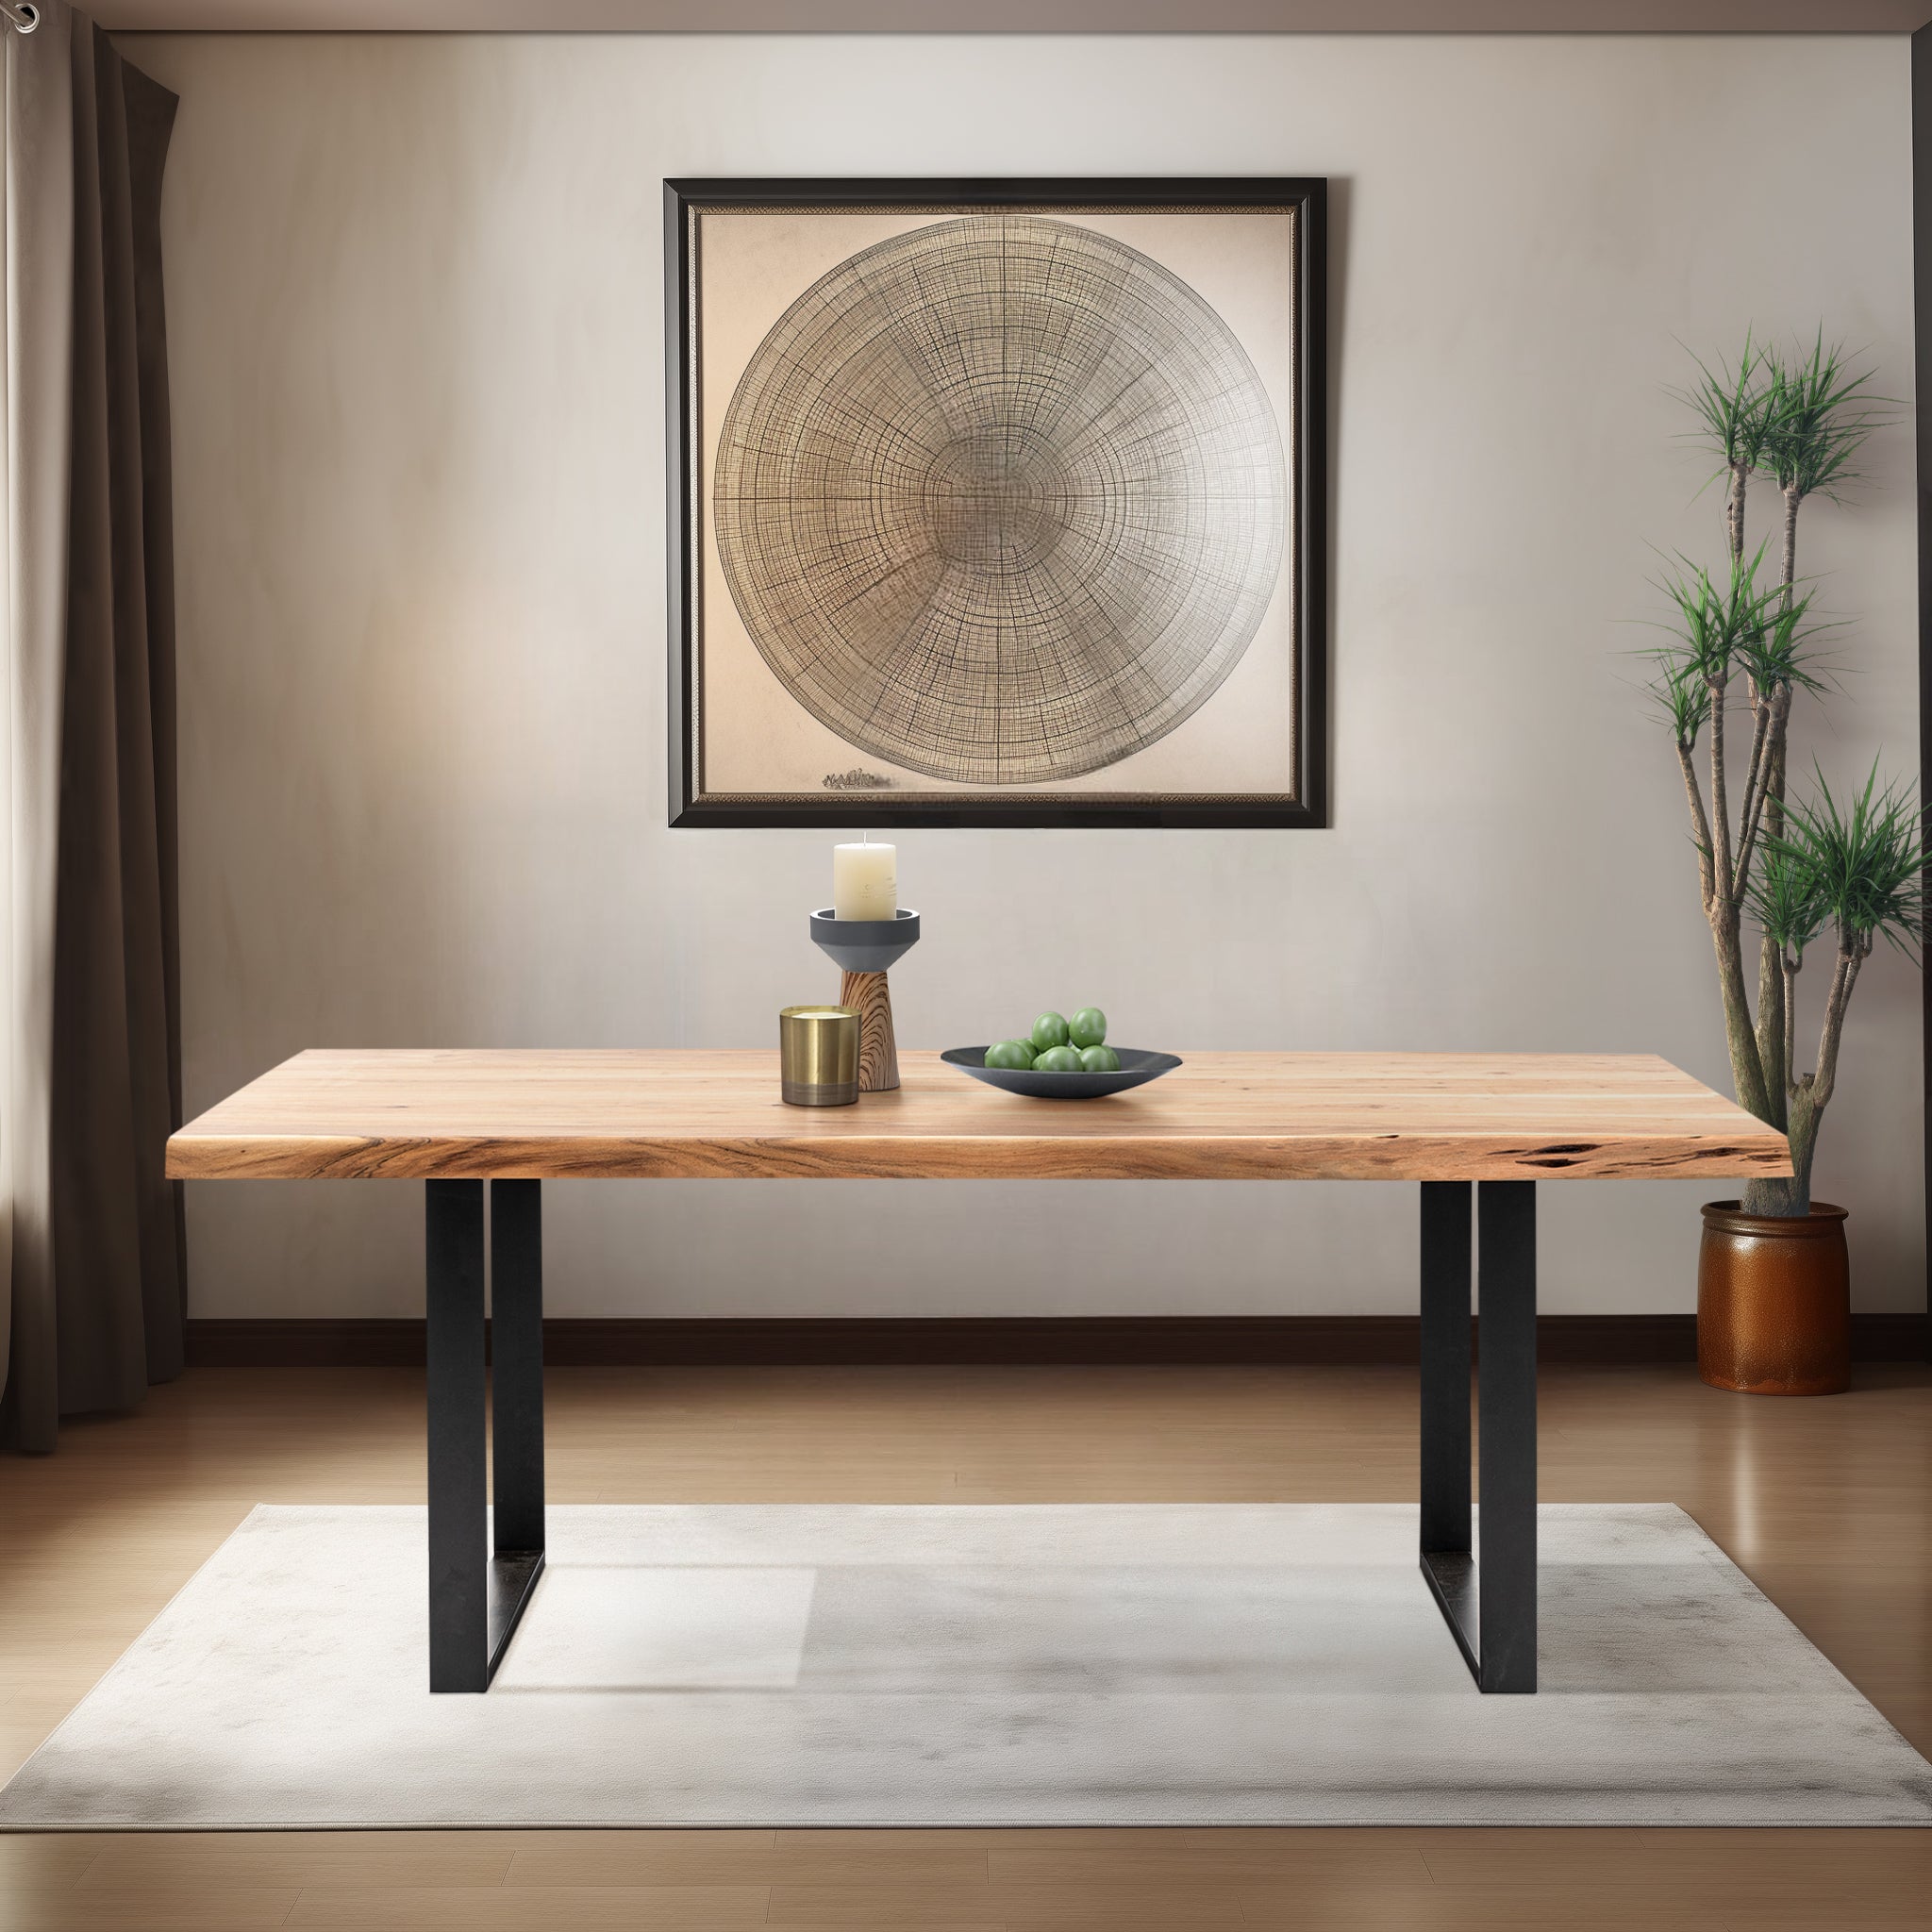 The Semi-Industrial Dining Table